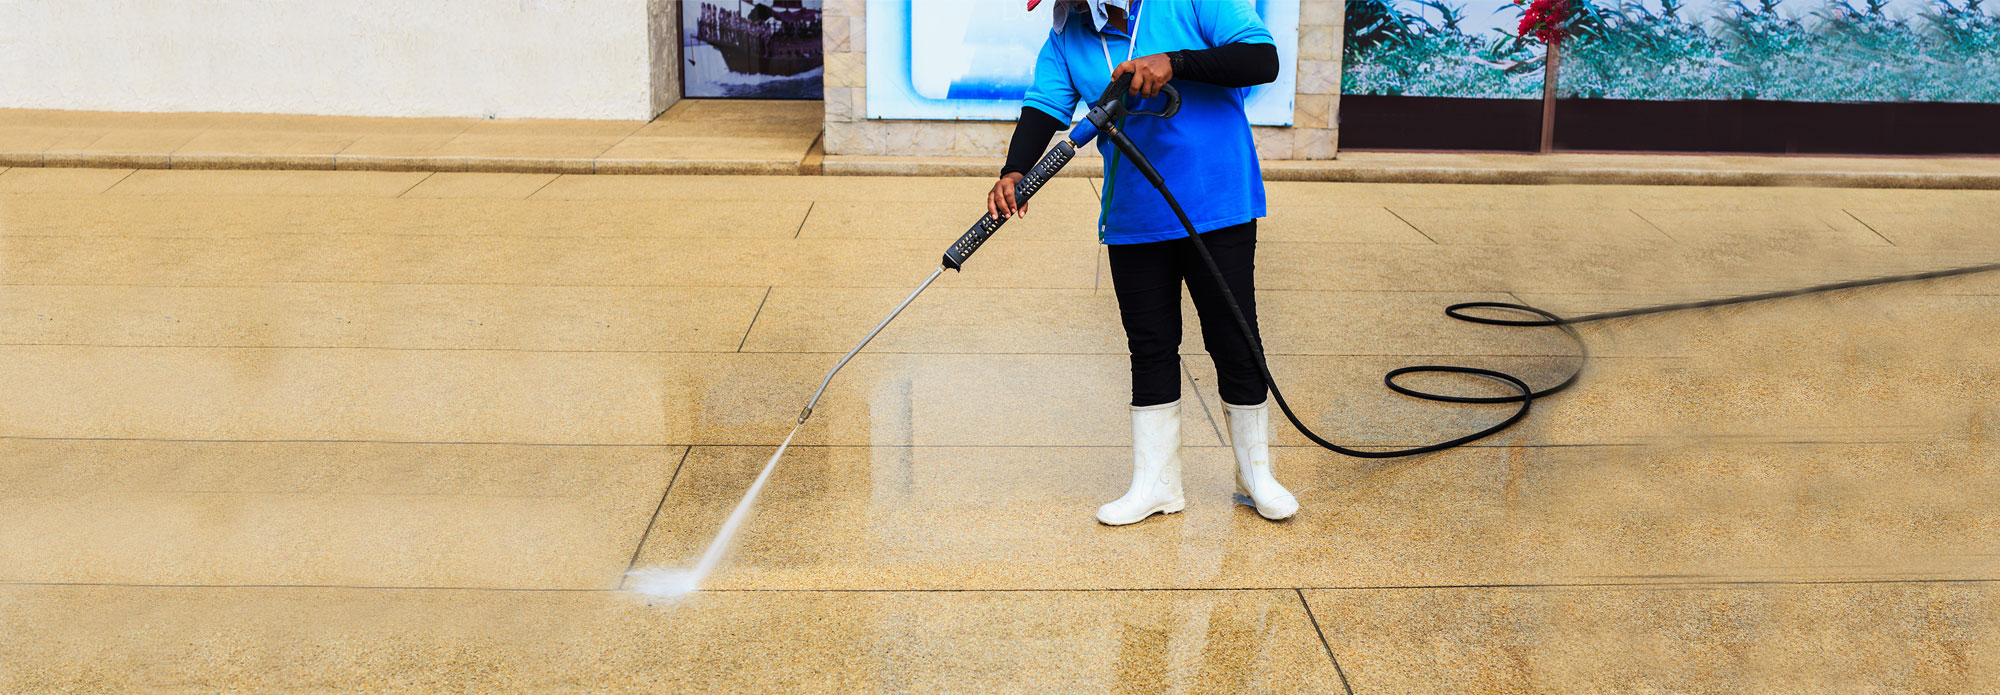 Offering Professional Pressure Washing Services